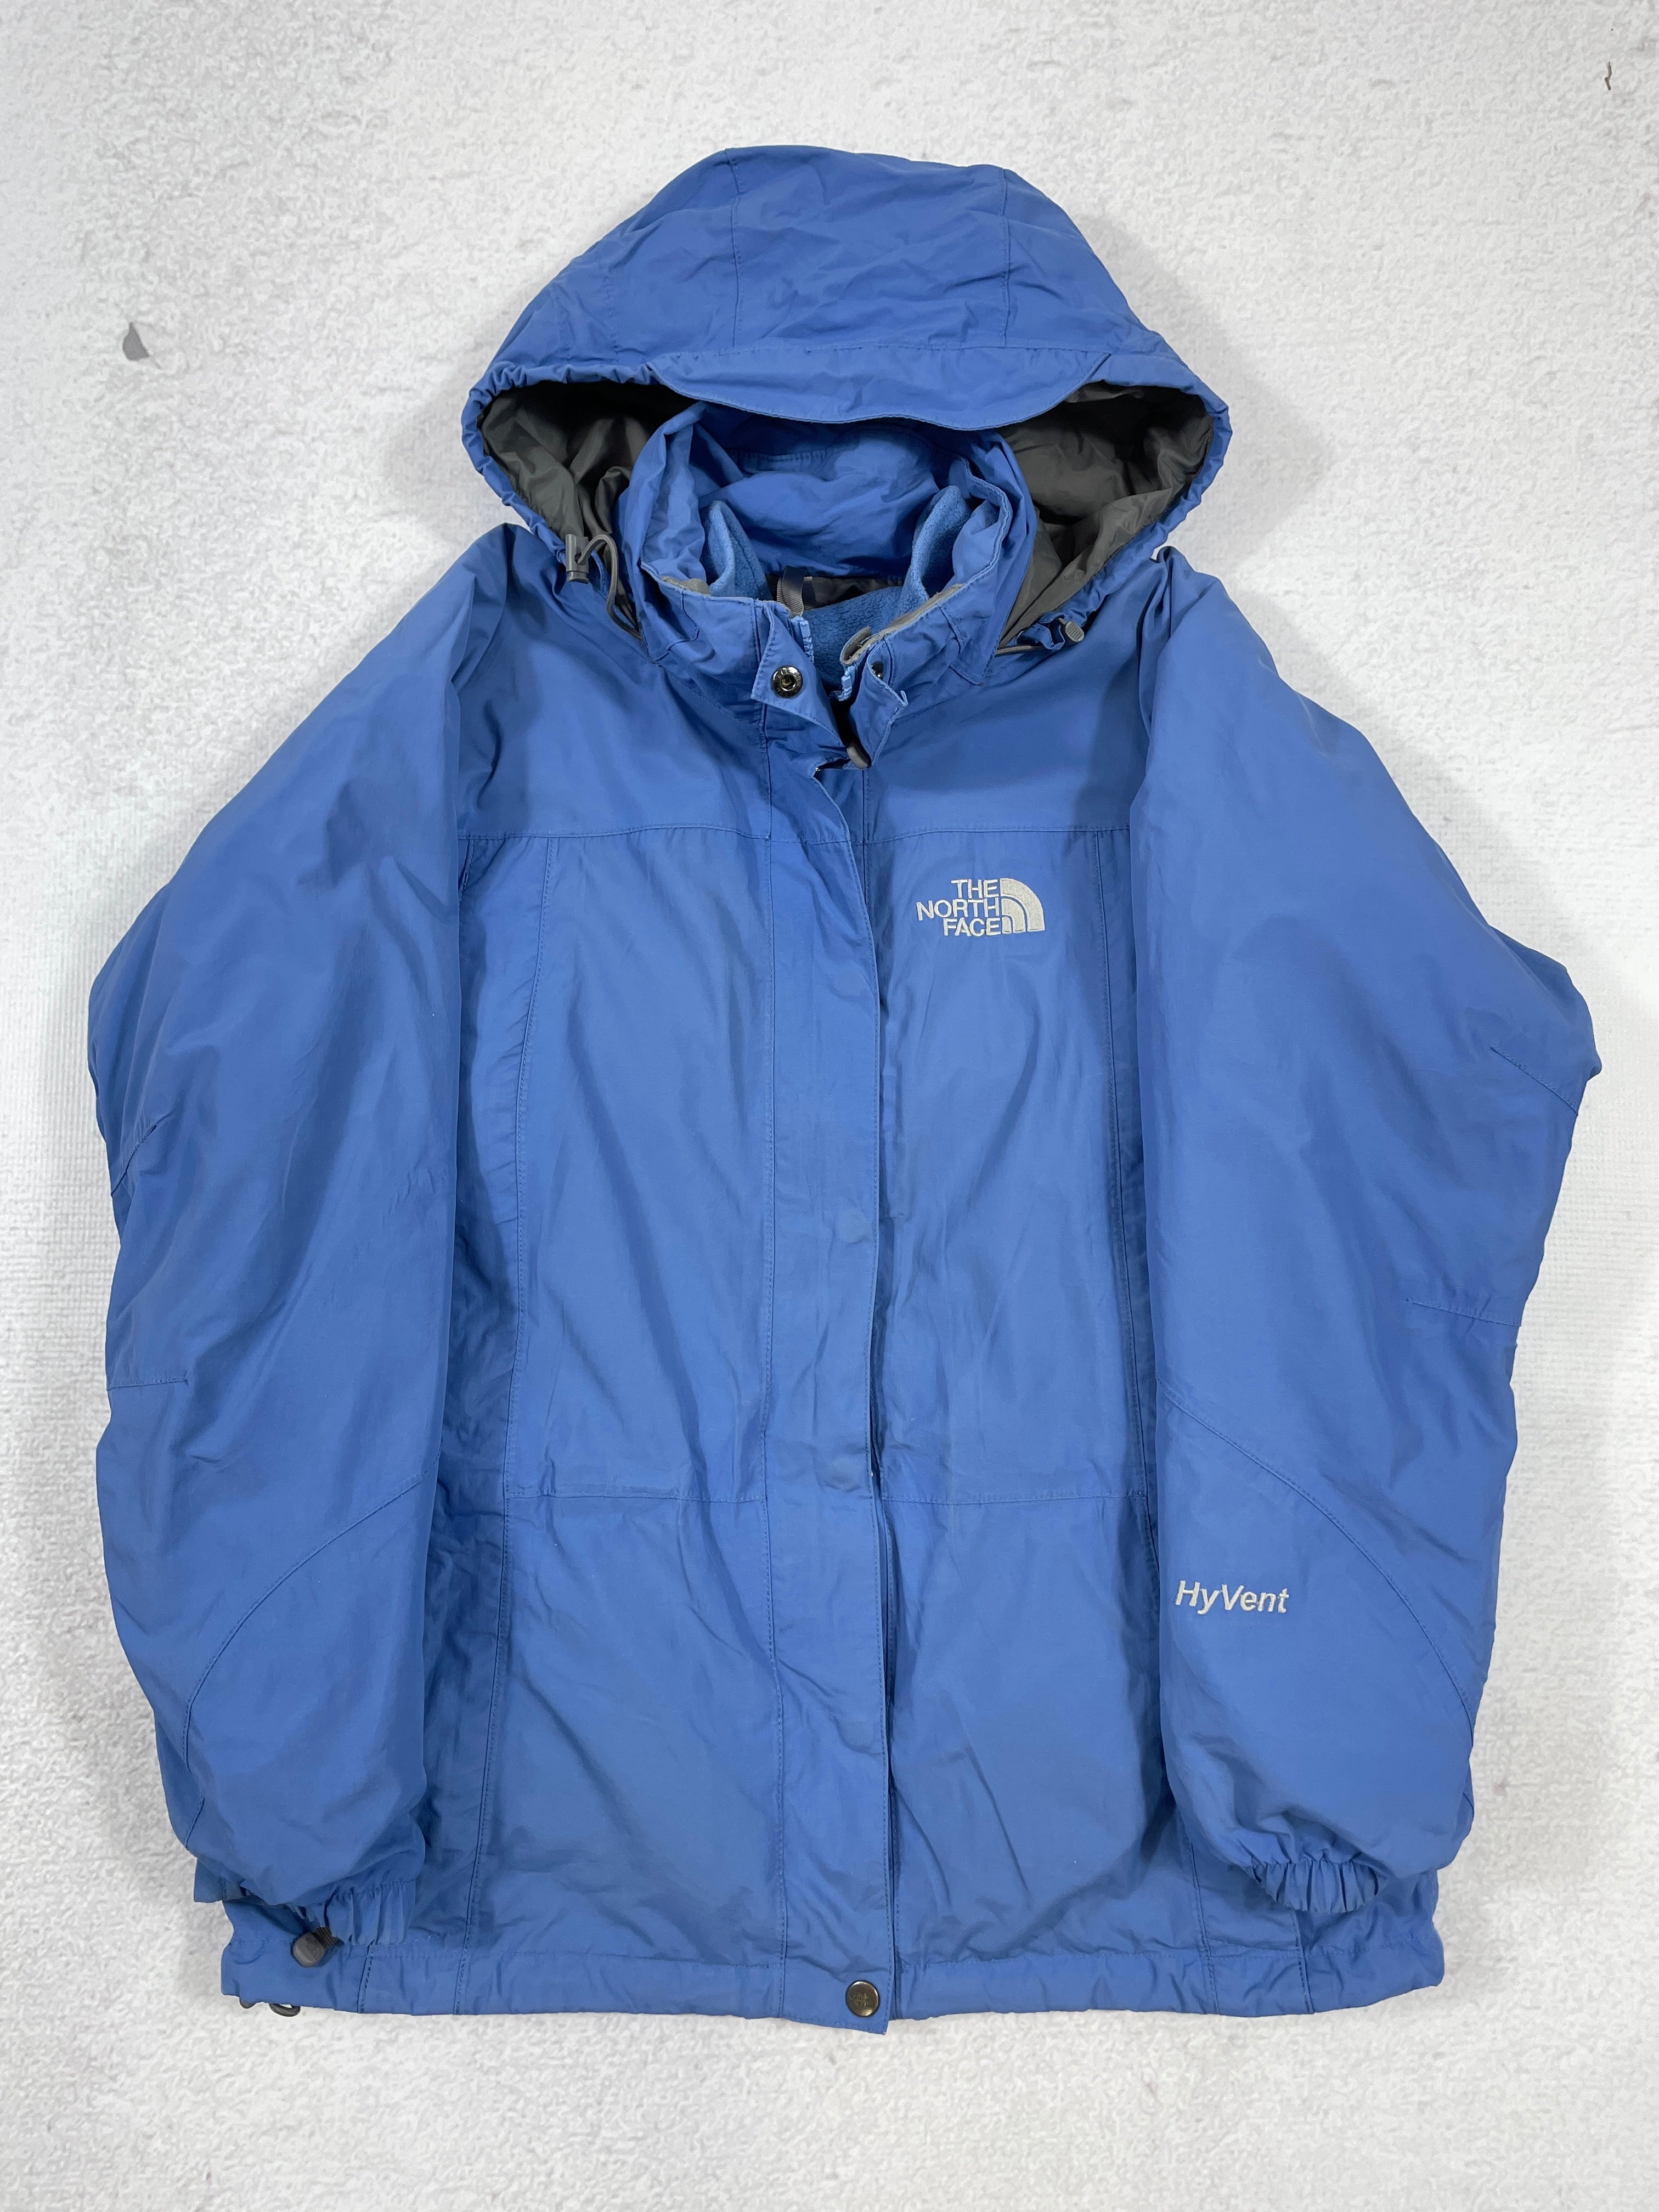 Vintage The North Face HyVent Insulated Jacket - Women's Medium